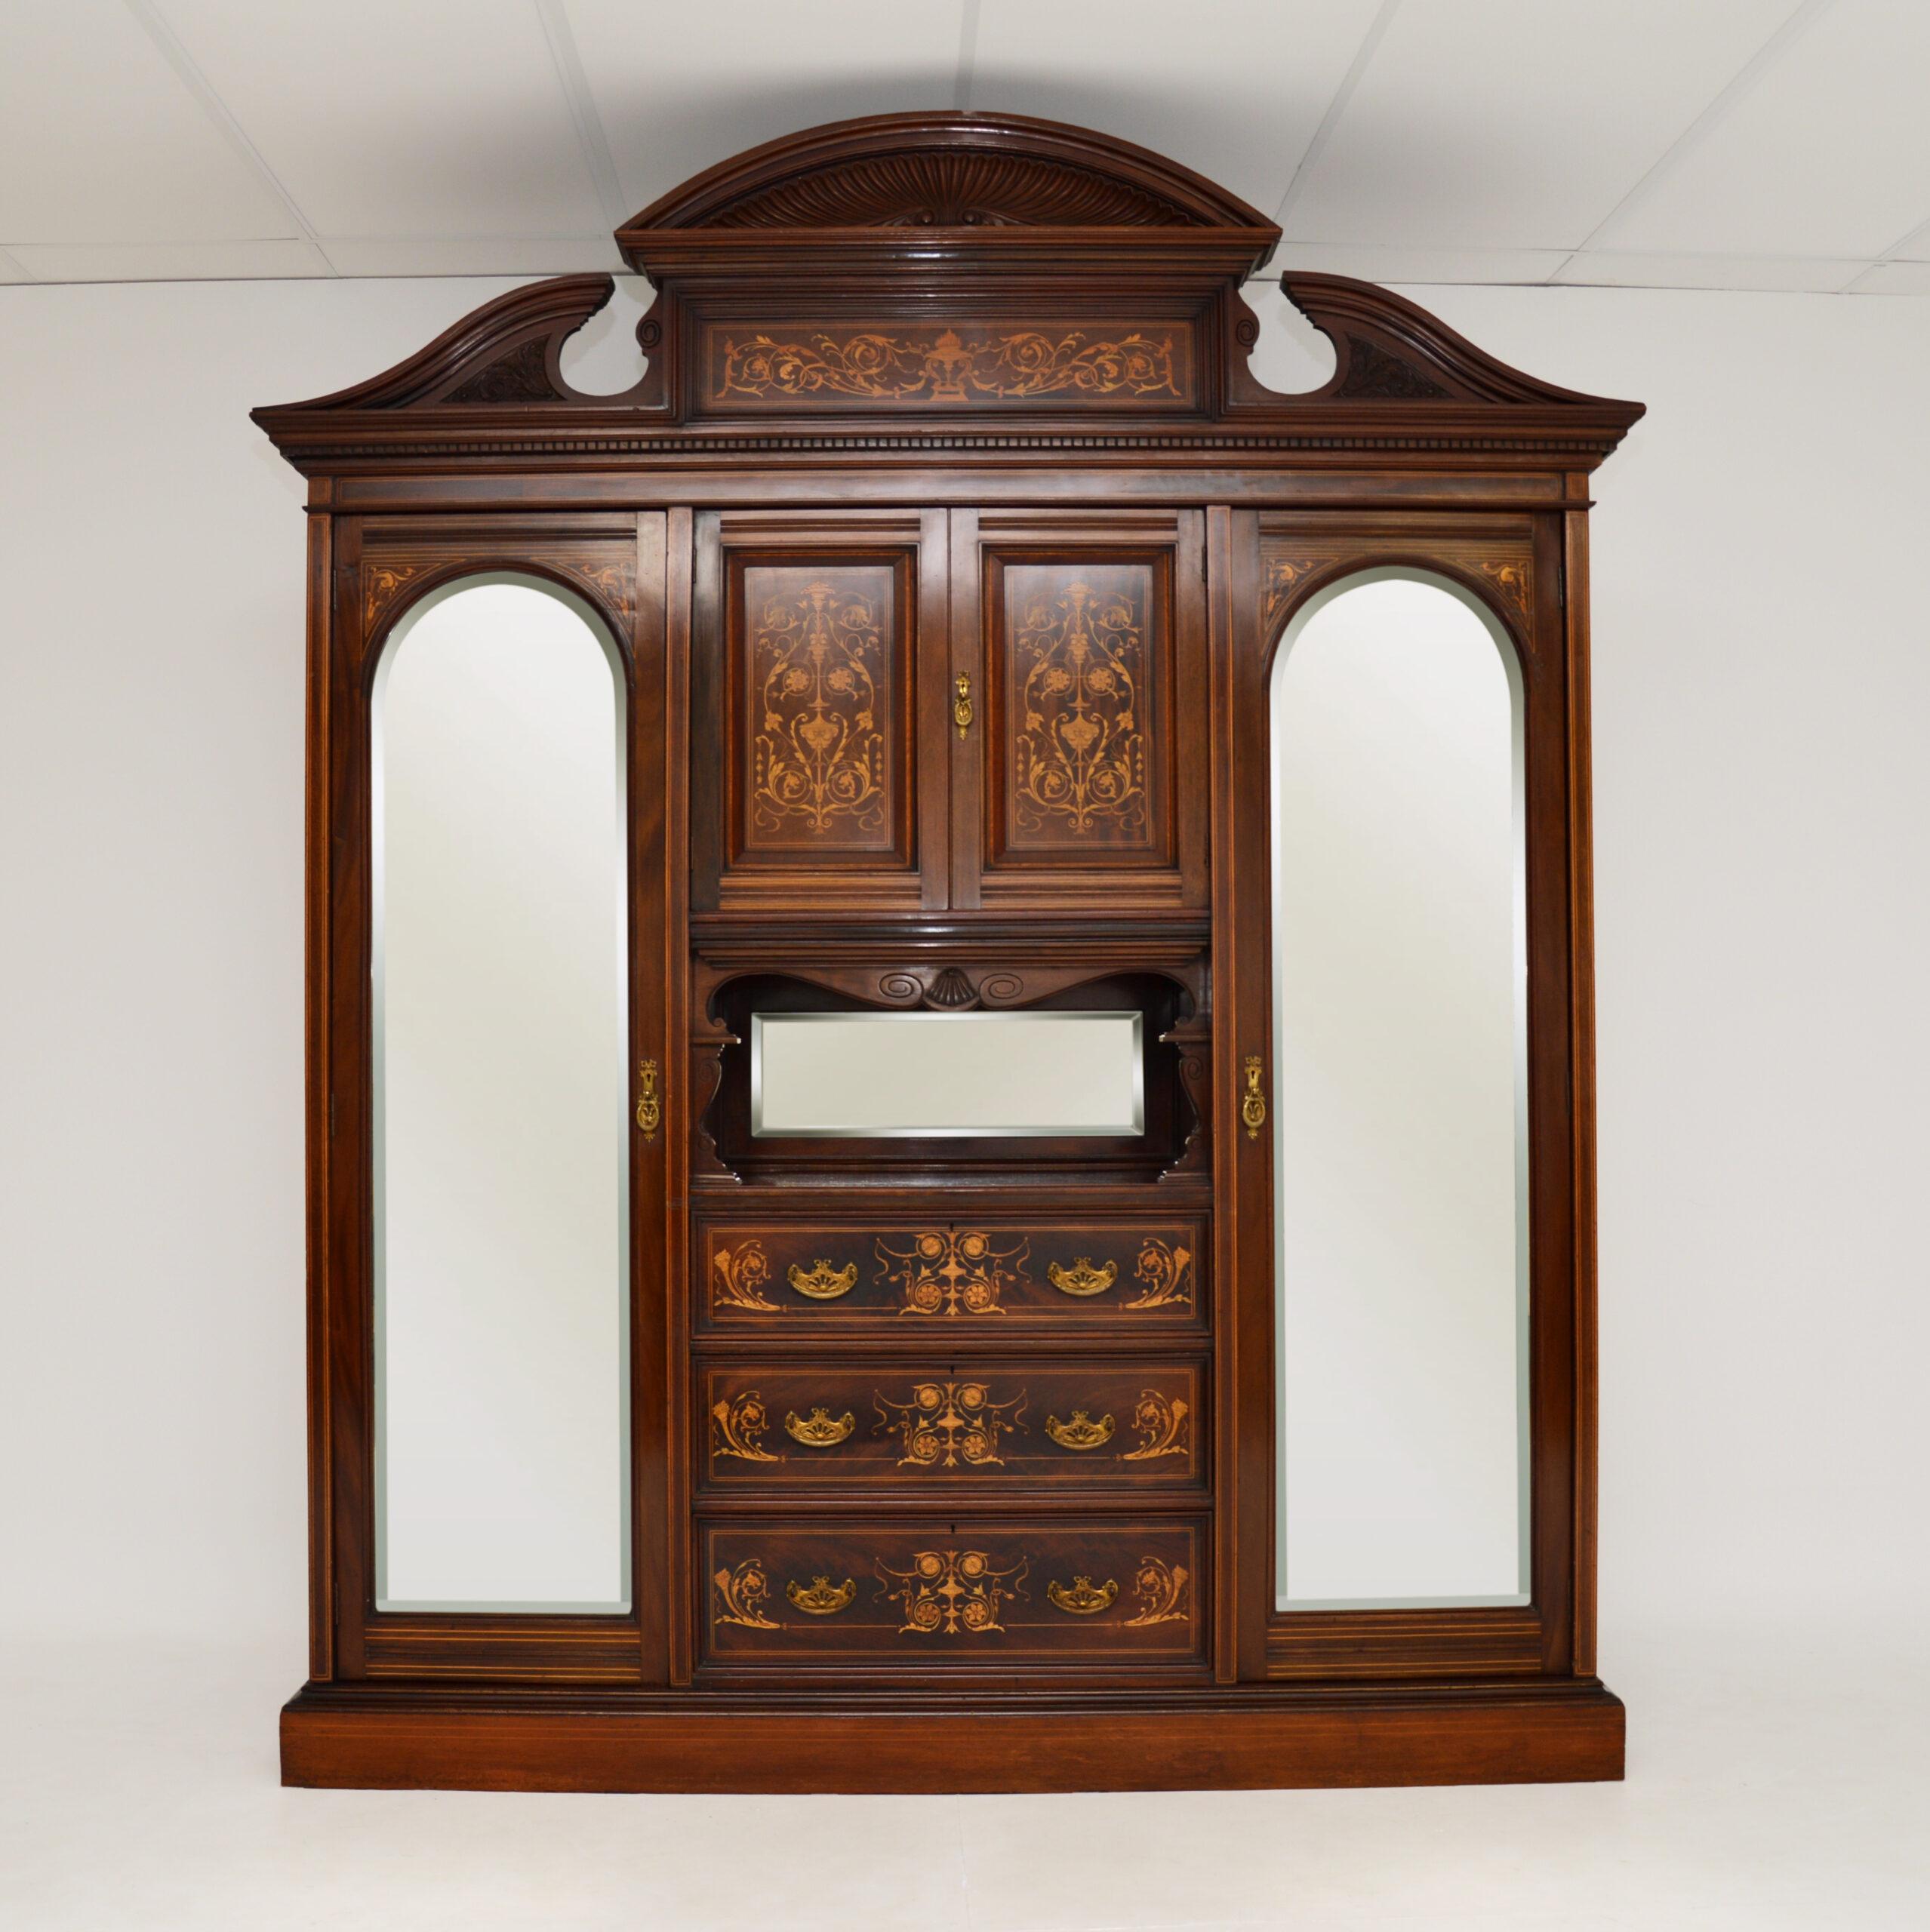 A magnificent antique mahogany Victorian wardrobe of the finest quality, this really is one of the most amazing wardrobes we have ever had. It was made in England by James Shoolbred & co, it dates from the 1880-1890 period.

It is extremely well